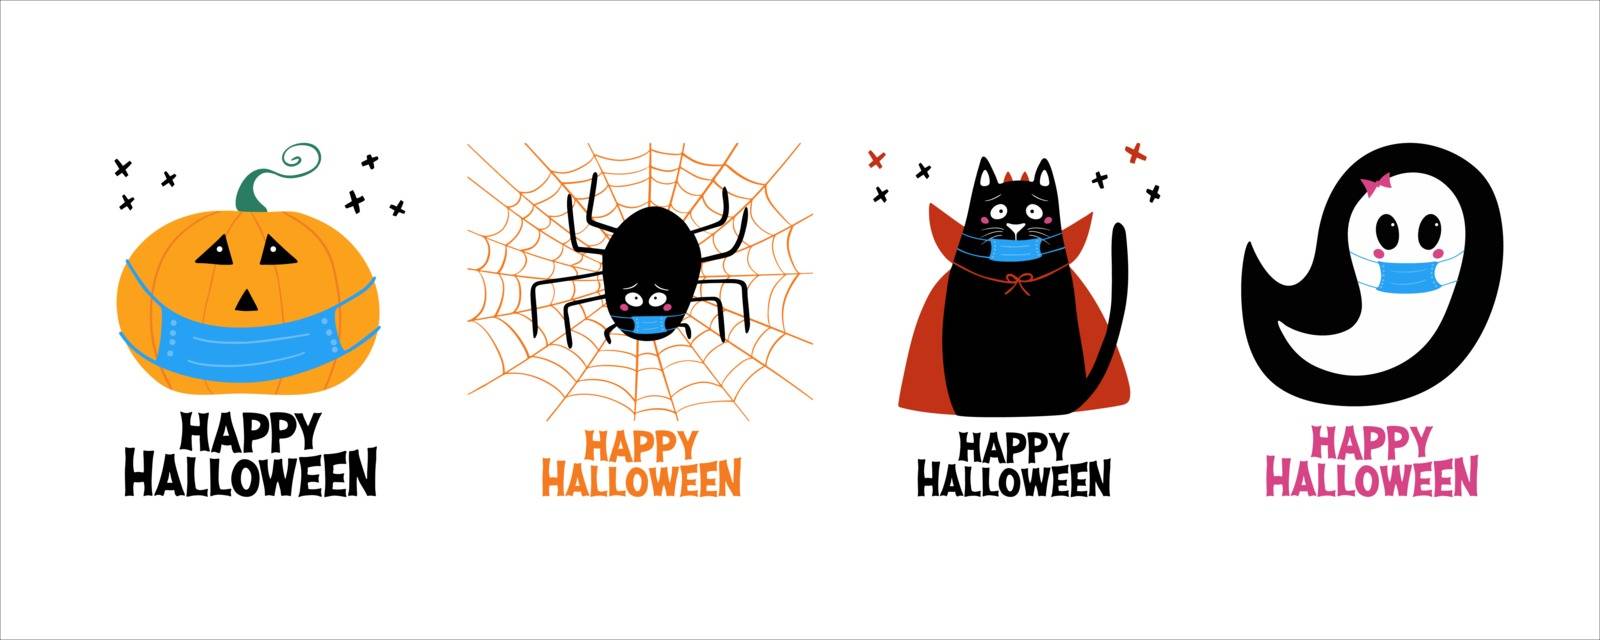 Quarantine Halloween greeting cards set. Jack o lantern, ghost, cat, spider in medical face mask. Isolated on white. Vector stock illustration.